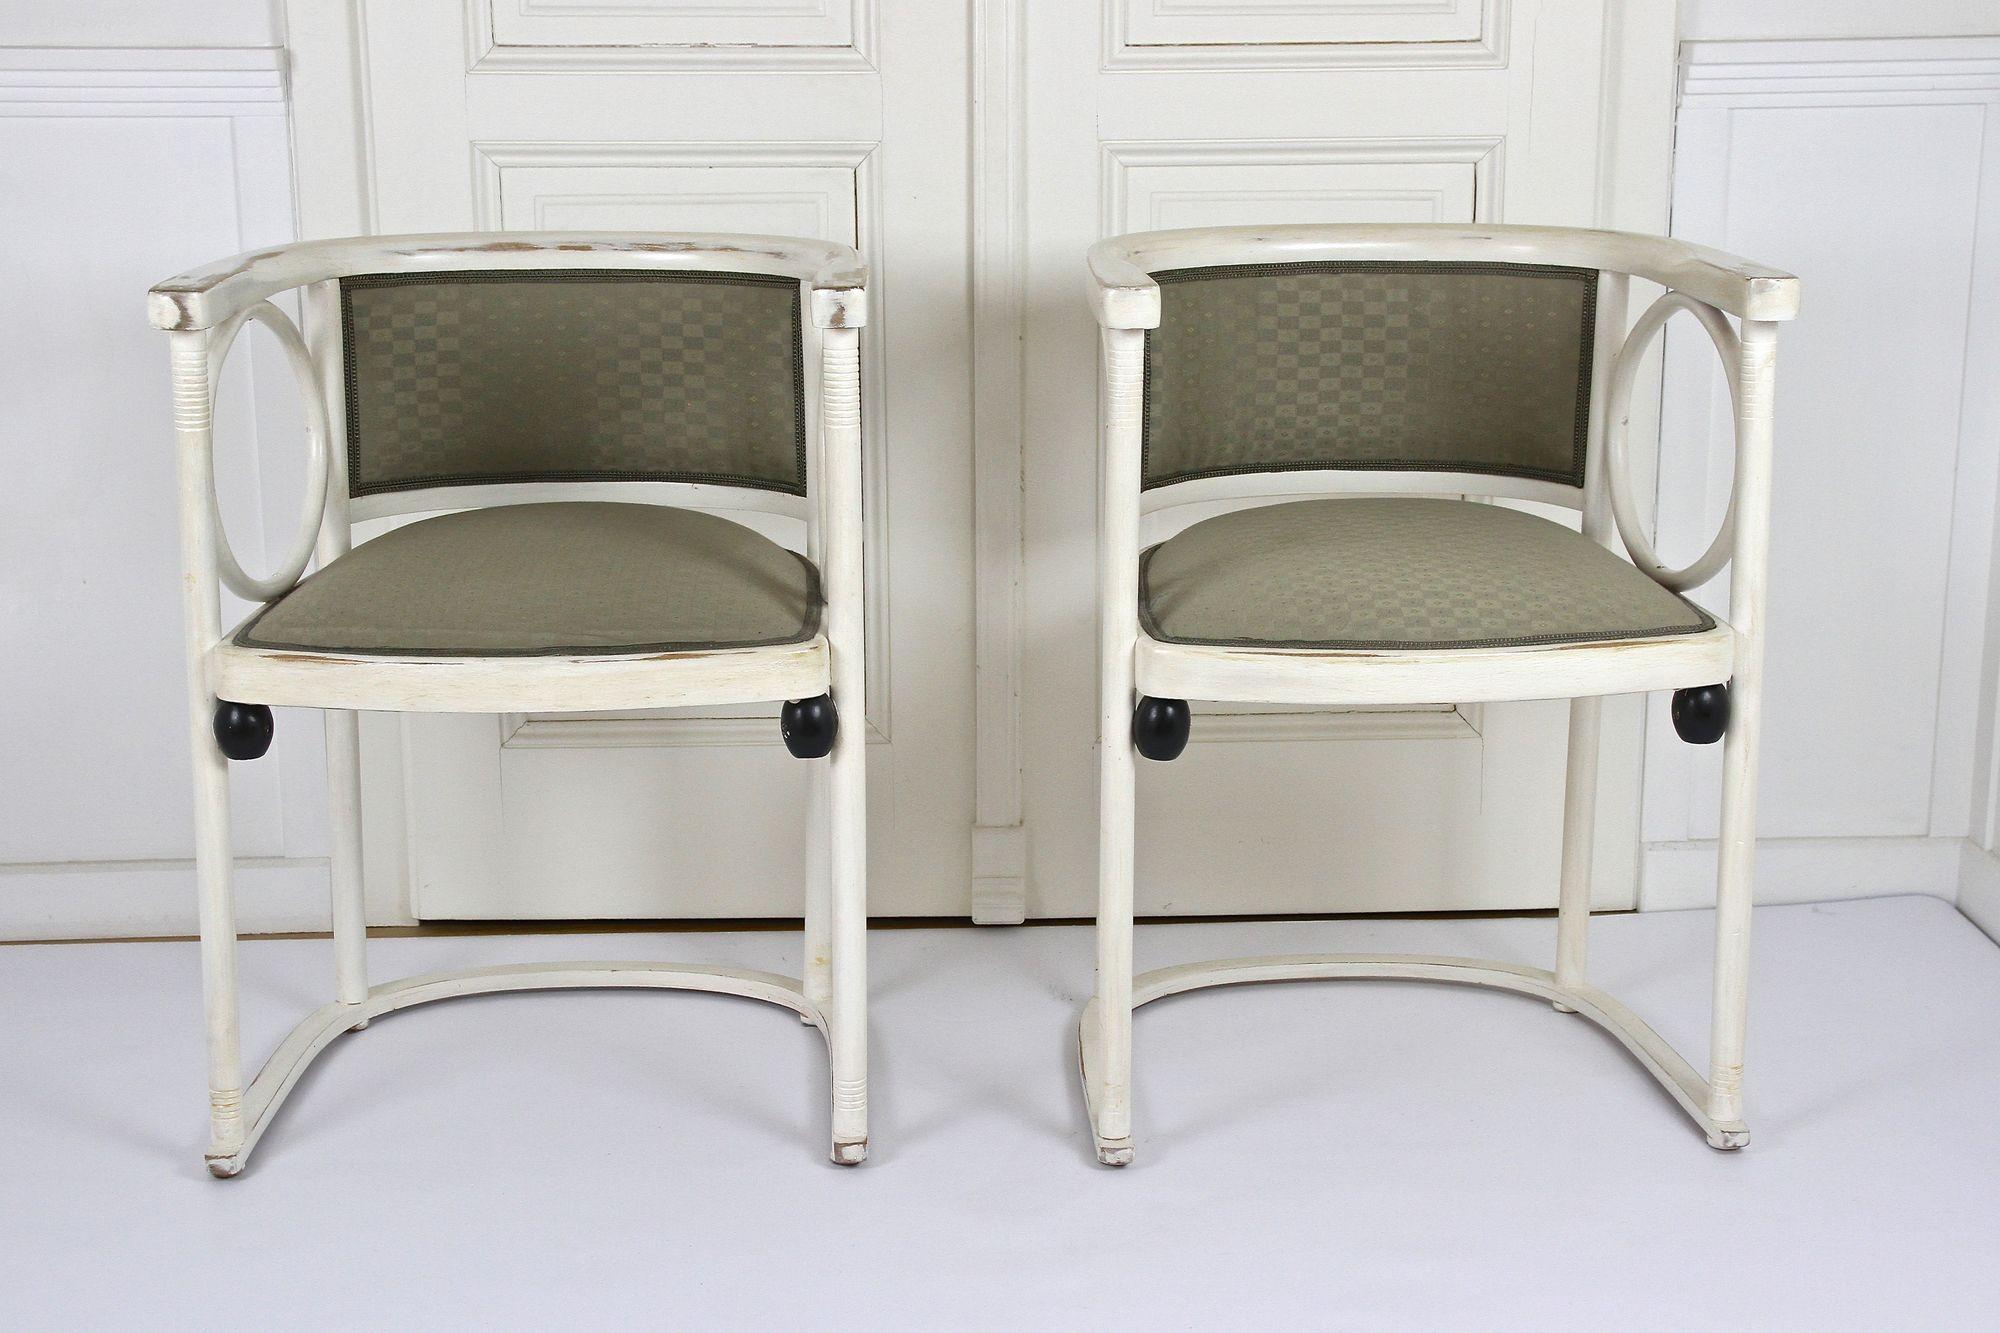 Austrian Art Nouveau Thonet Armchairs by Josef Hoffmann, White Lacquered, AT ca. 1905 For Sale